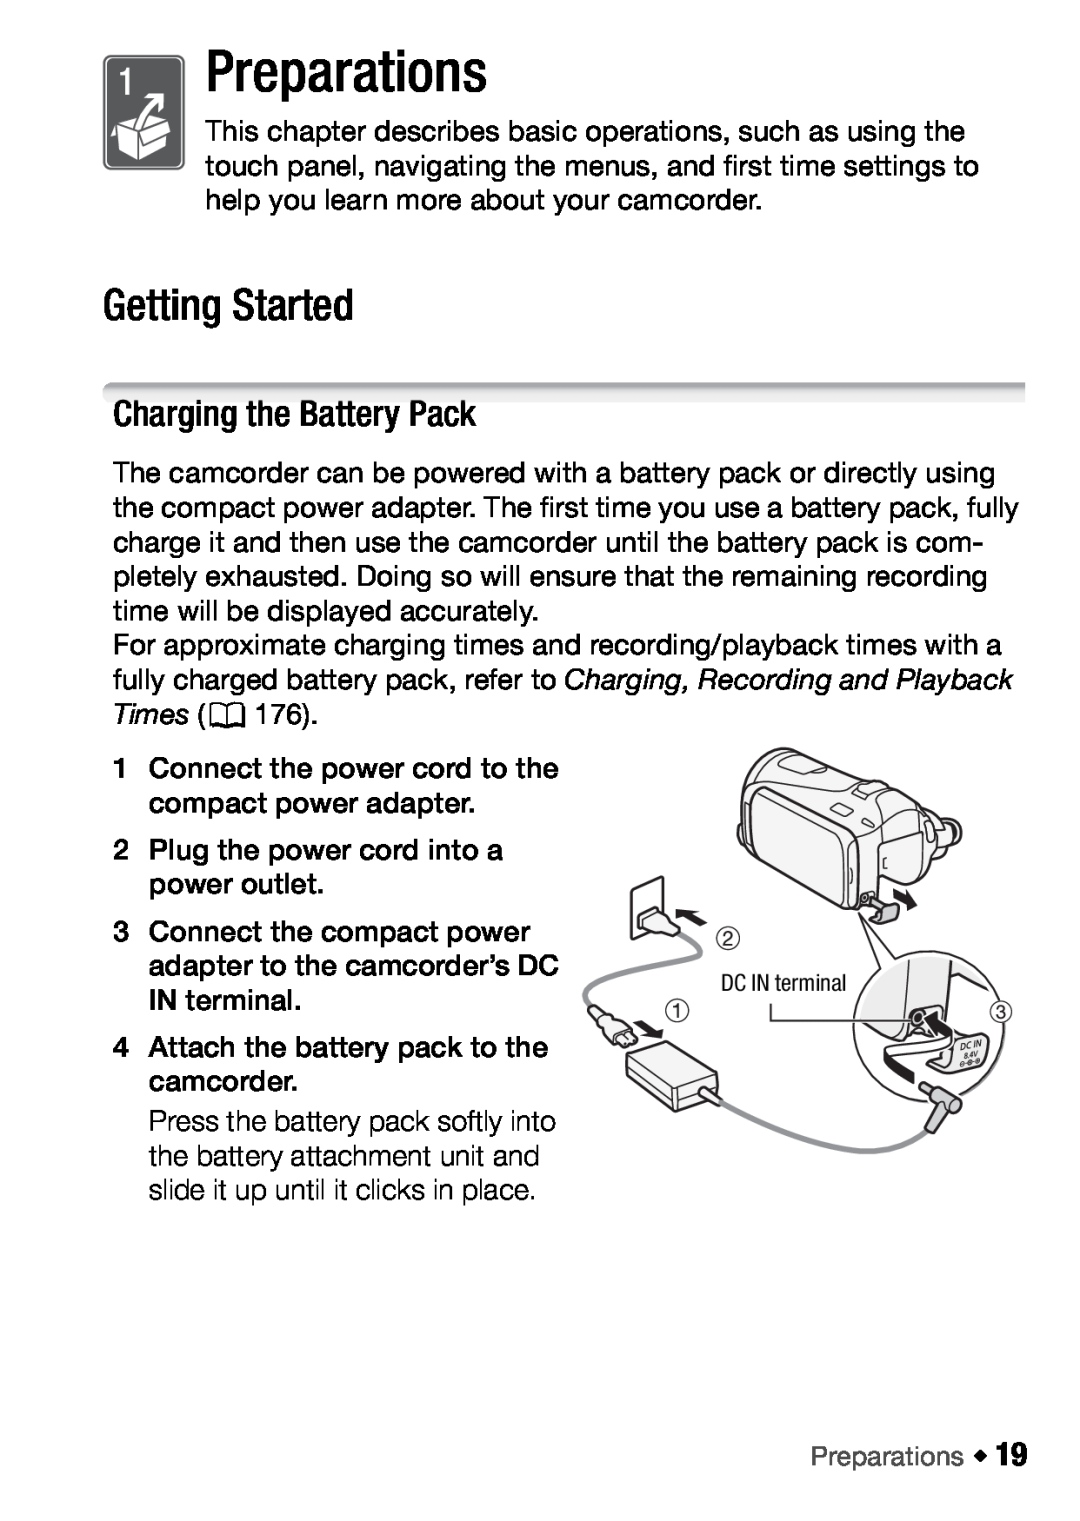 Canon HFM46, HFM406 instruction manual Preparations, Getting Started, Charging the Battery Pack 